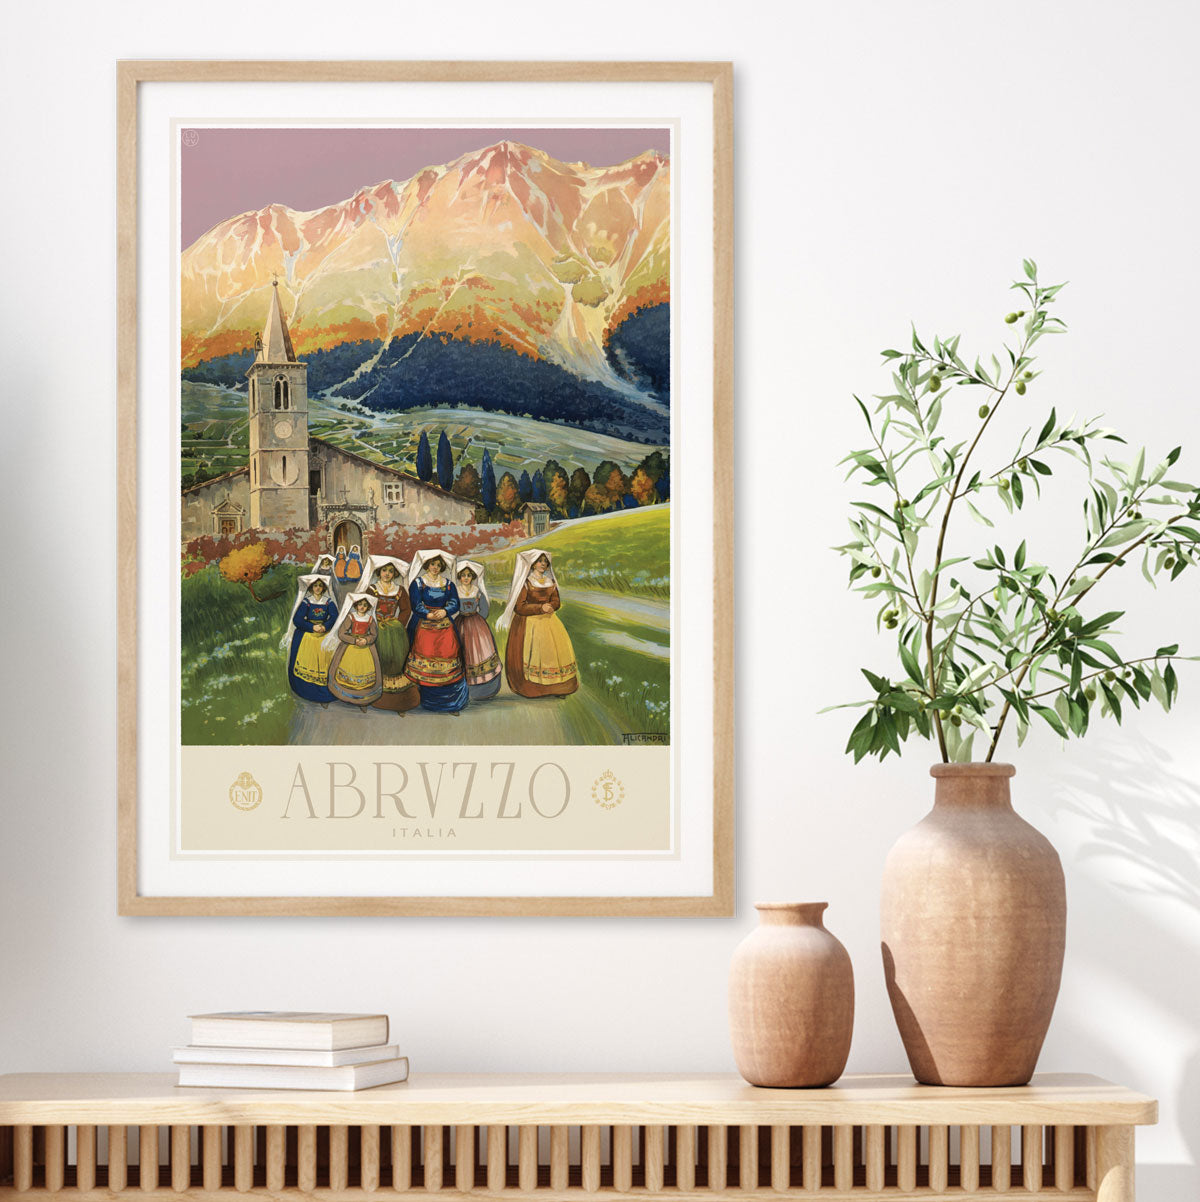 Abrvzzo Italy retro vintage print from Places We Luv